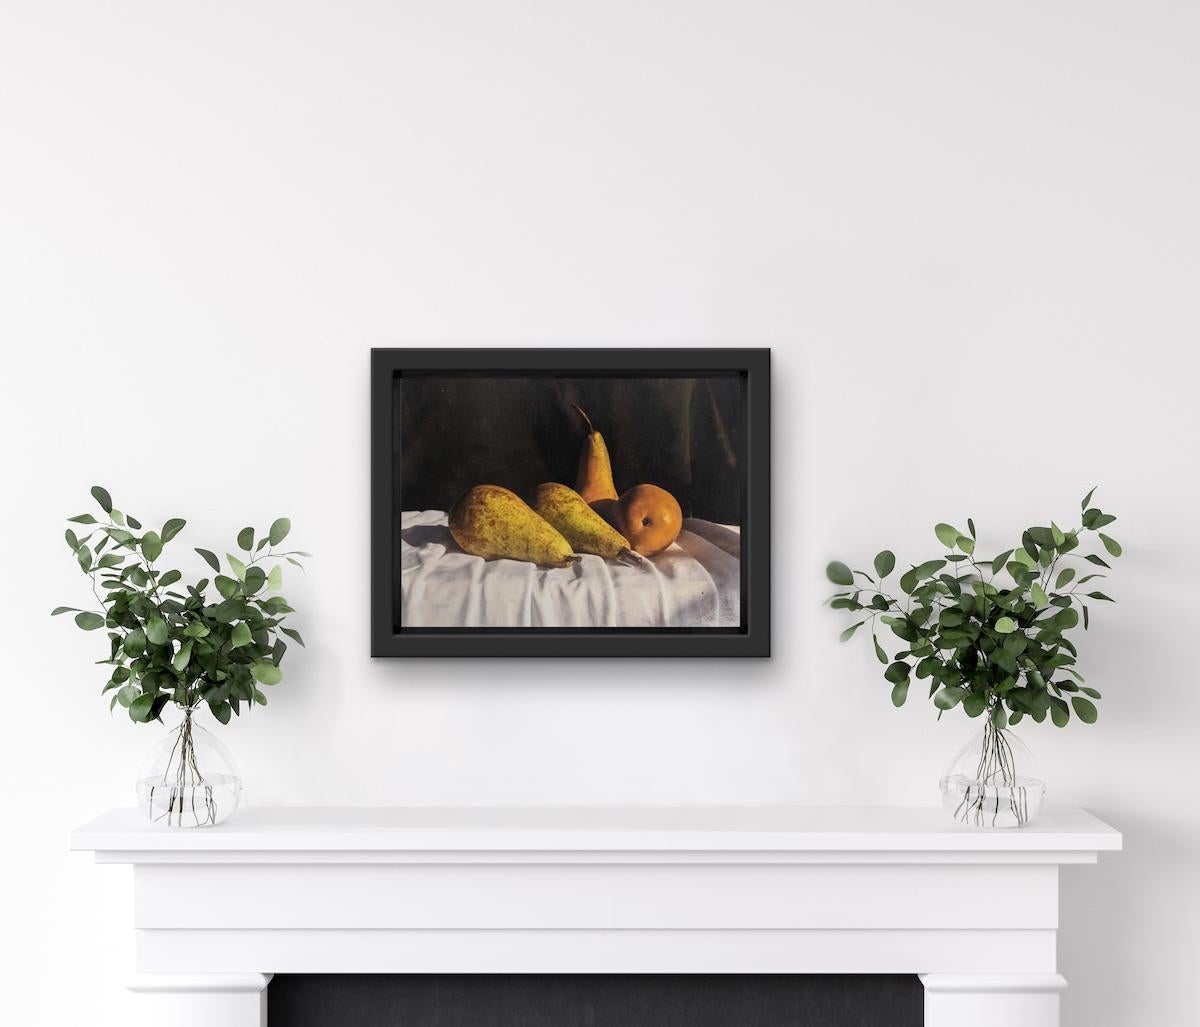 Conference Pears, Kate Verrion, Still life painting, Oil painting, 2022 1